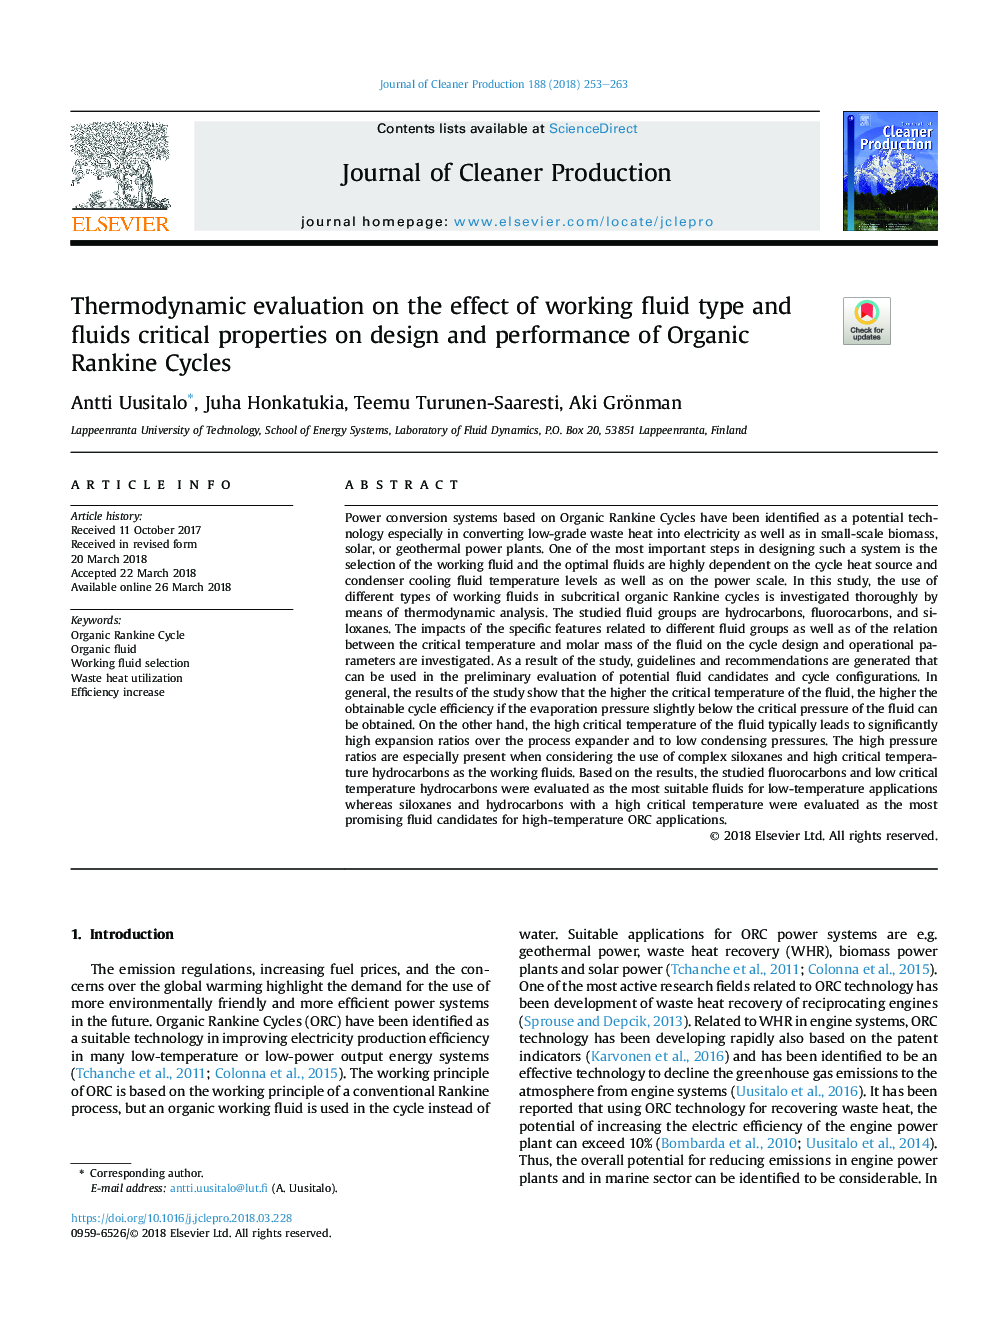 Thermodynamic evaluation on the effect of working fluid type and fluids critical properties on design and performance of Organic Rankine Cycles